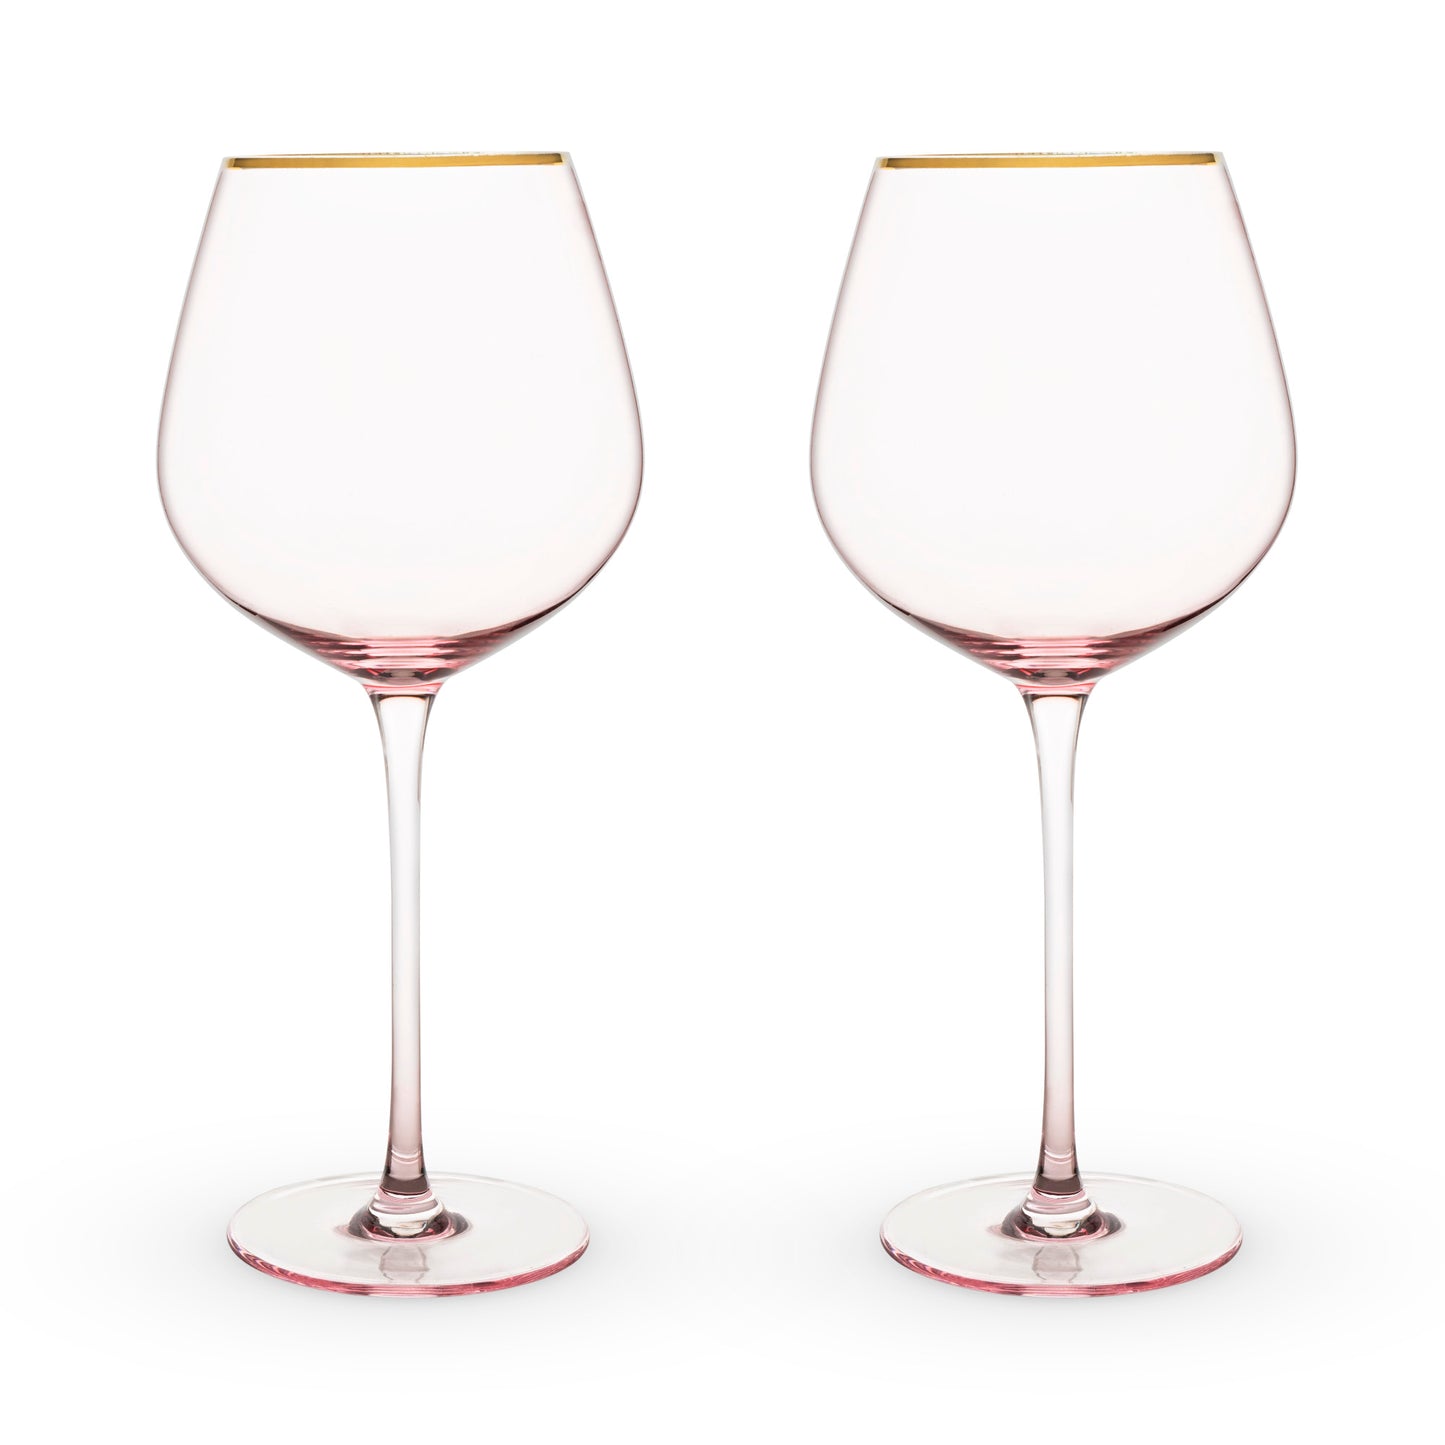 Rose Crystal Red Wine Glass Set by Twine®